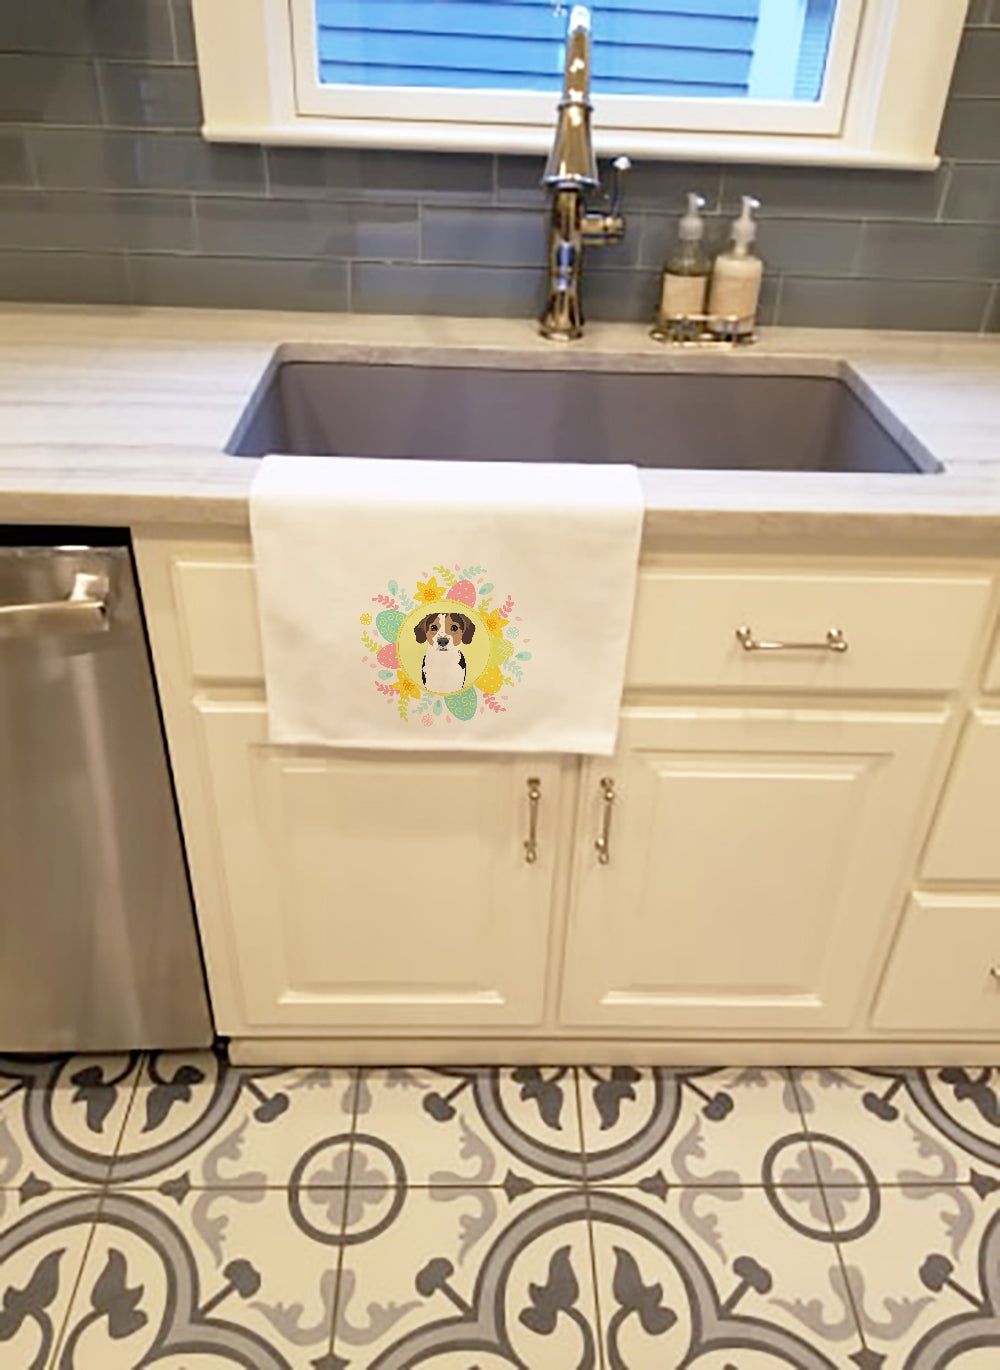 Buy this Beagle Tricolor Ticked Easter White Kitchen Towel Set of 2